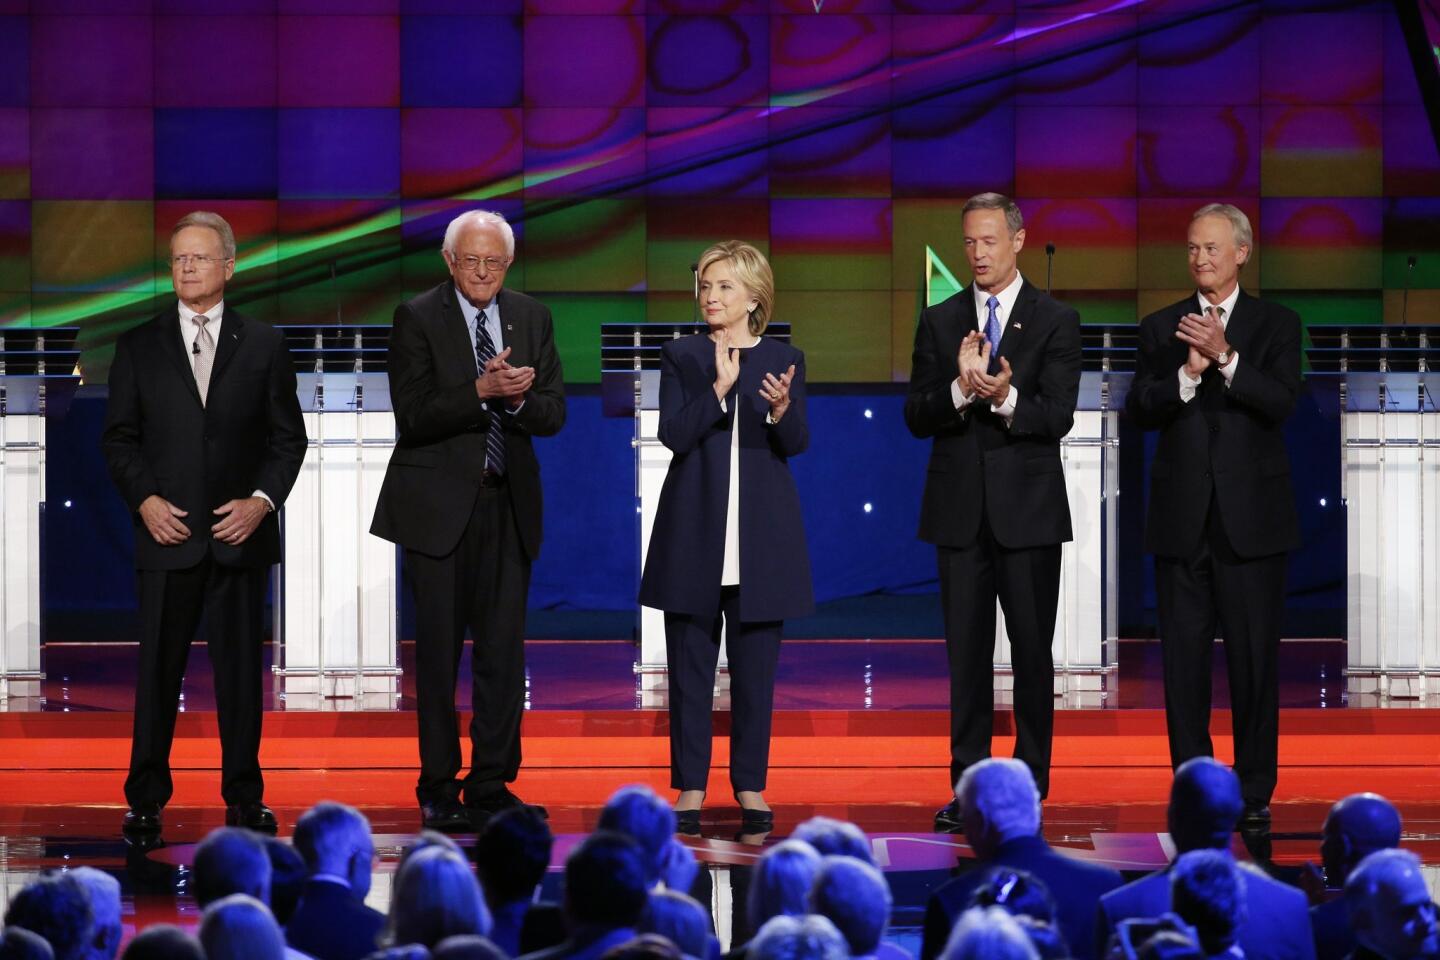 Democratic presidential candidates from left, former Virginia Sen. Jim Webb, Sen. Bernie Sanders, of Vermont, Hillary Rodham Clinton, former Maryland Gov. Martin O'Malley, and former Rhode Island Gov. Lincoln Chafee take the stage before the CNN Democratic presidential debate in Las Vegas.